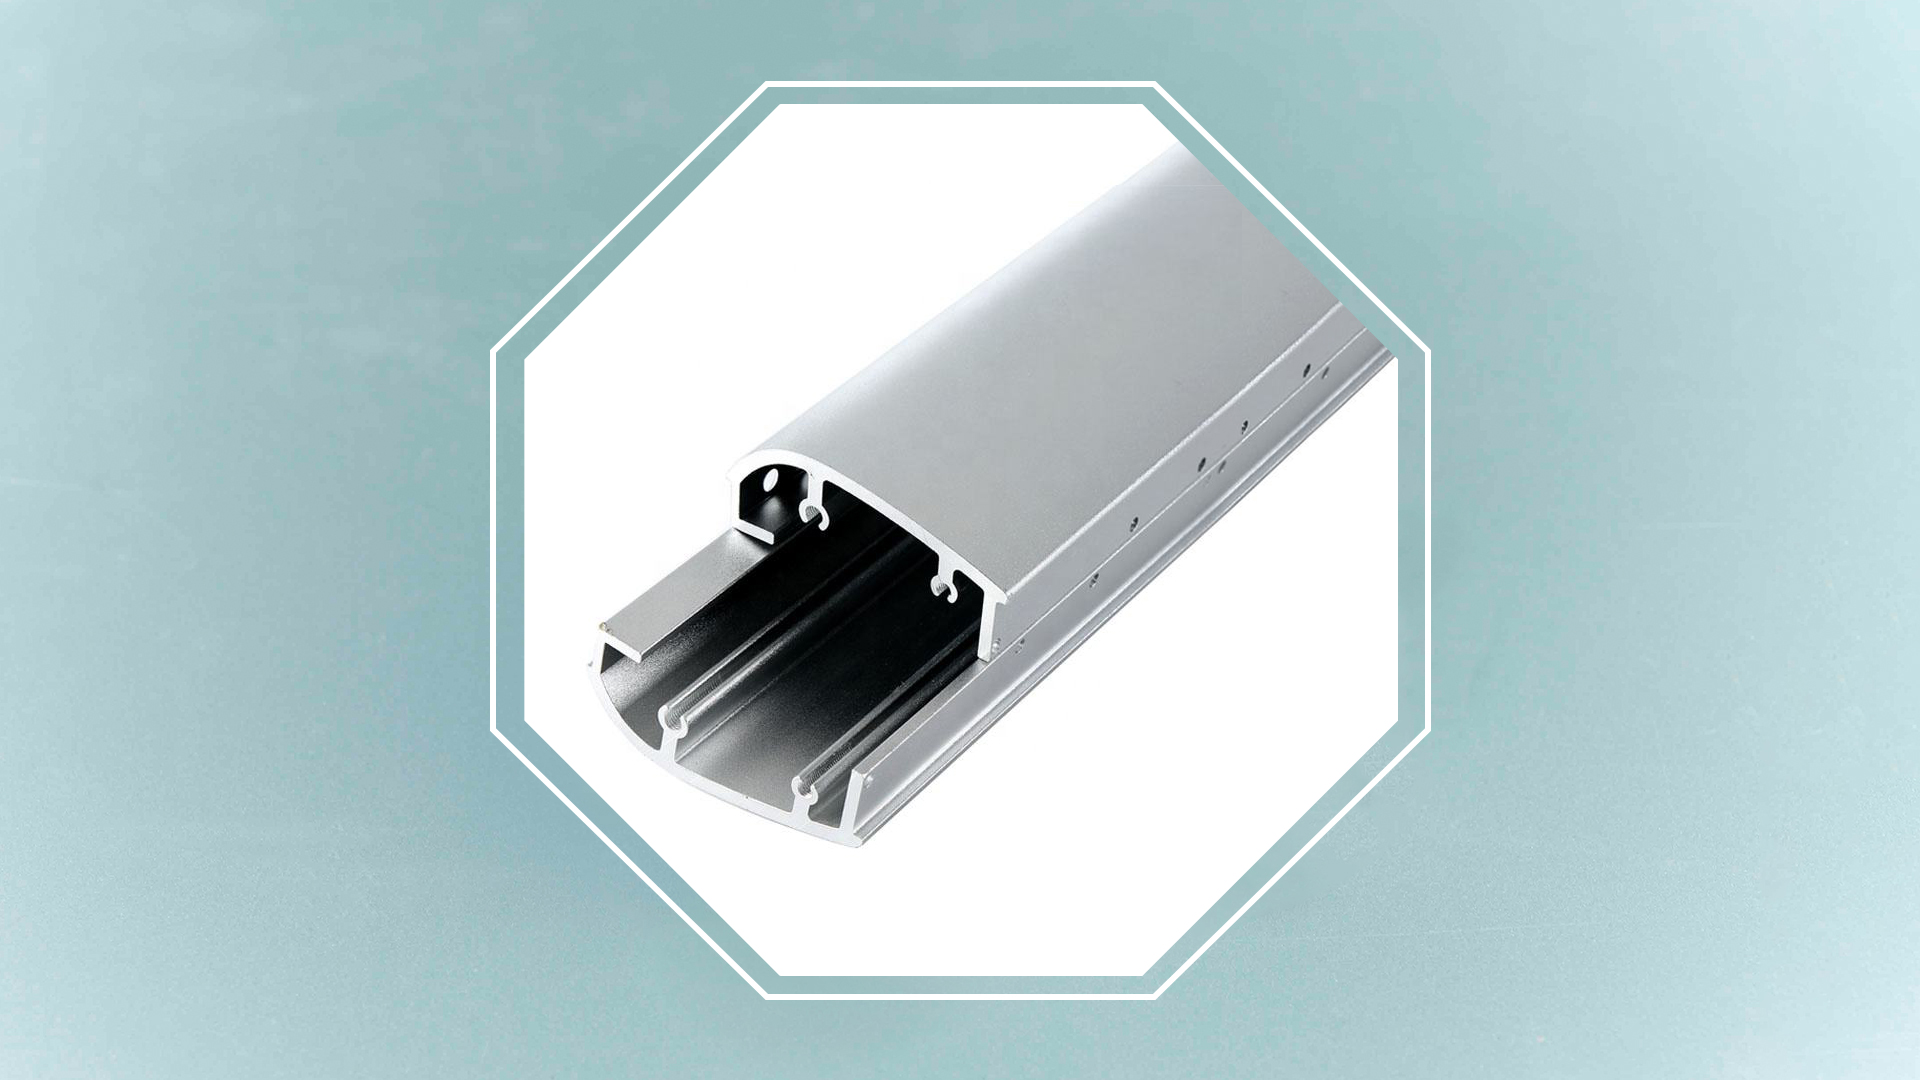 Advantages and disadvantages of industrial aluminum profile processing